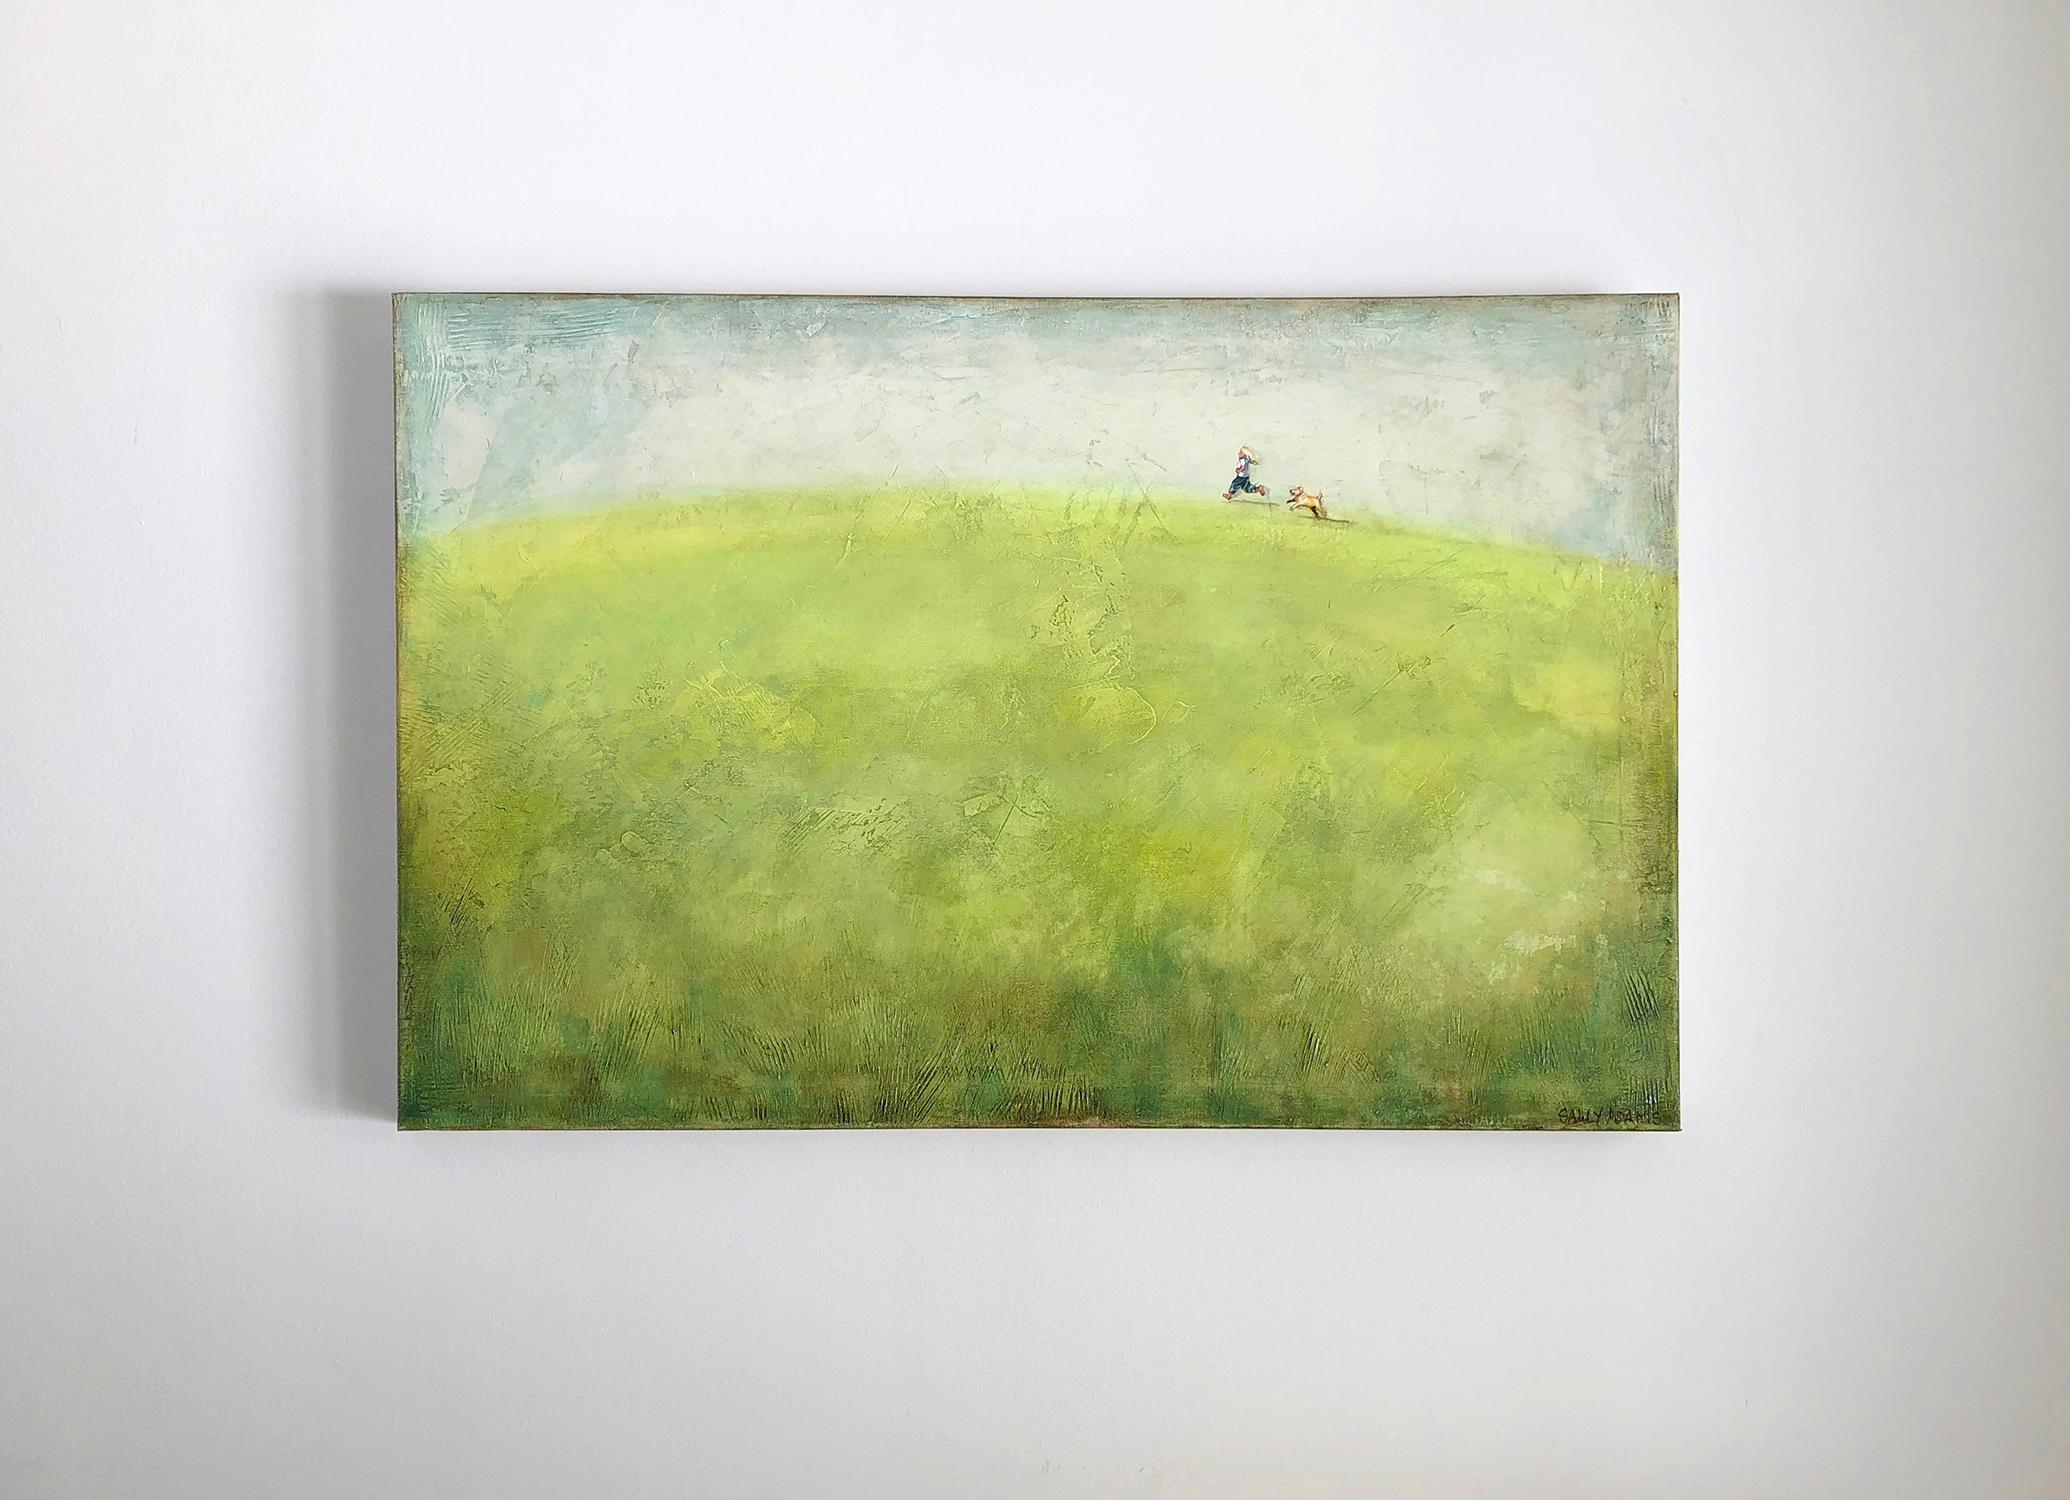 <p>Artist Comments<br />A little girl runs across a grassy hill, her golden retriever puppy in tow. An uplifting scene illustrating the exuberance, adventures and bright future of childhood. 